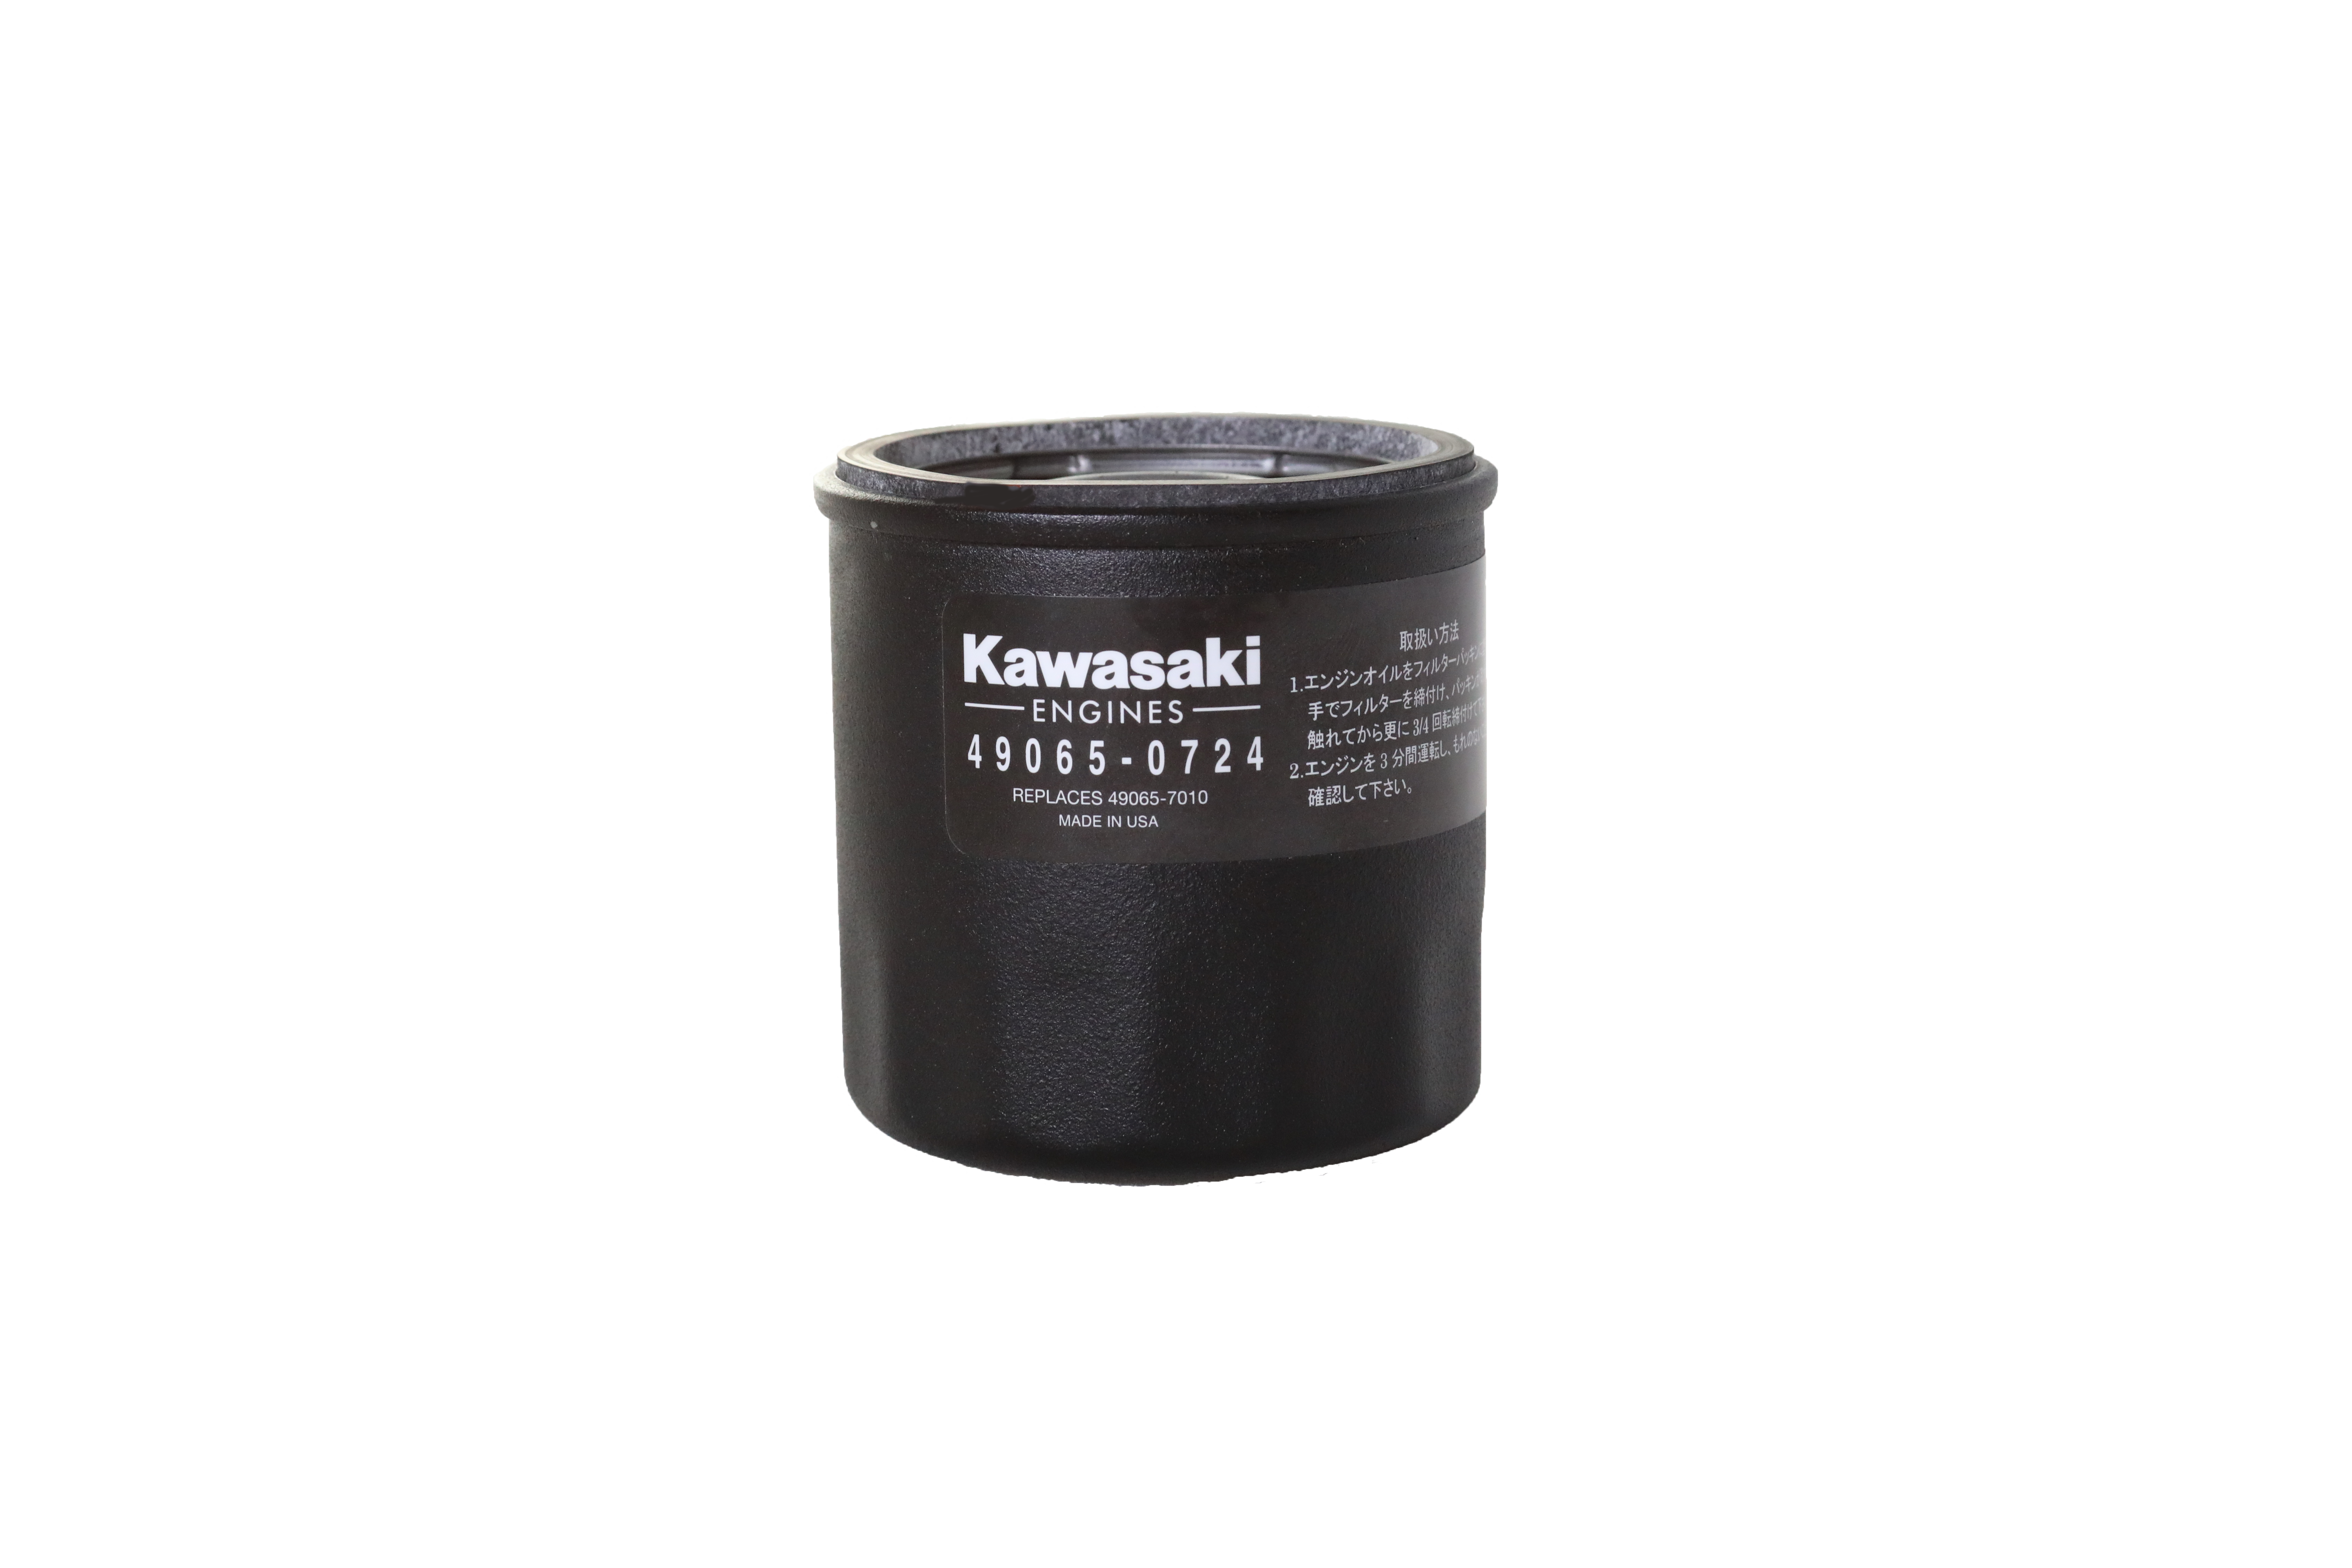 Kawasaki Oil Filter 49065-0724 Case of 12 OEM Oil Filters 49065- 7010) - Power Tool Outfitters